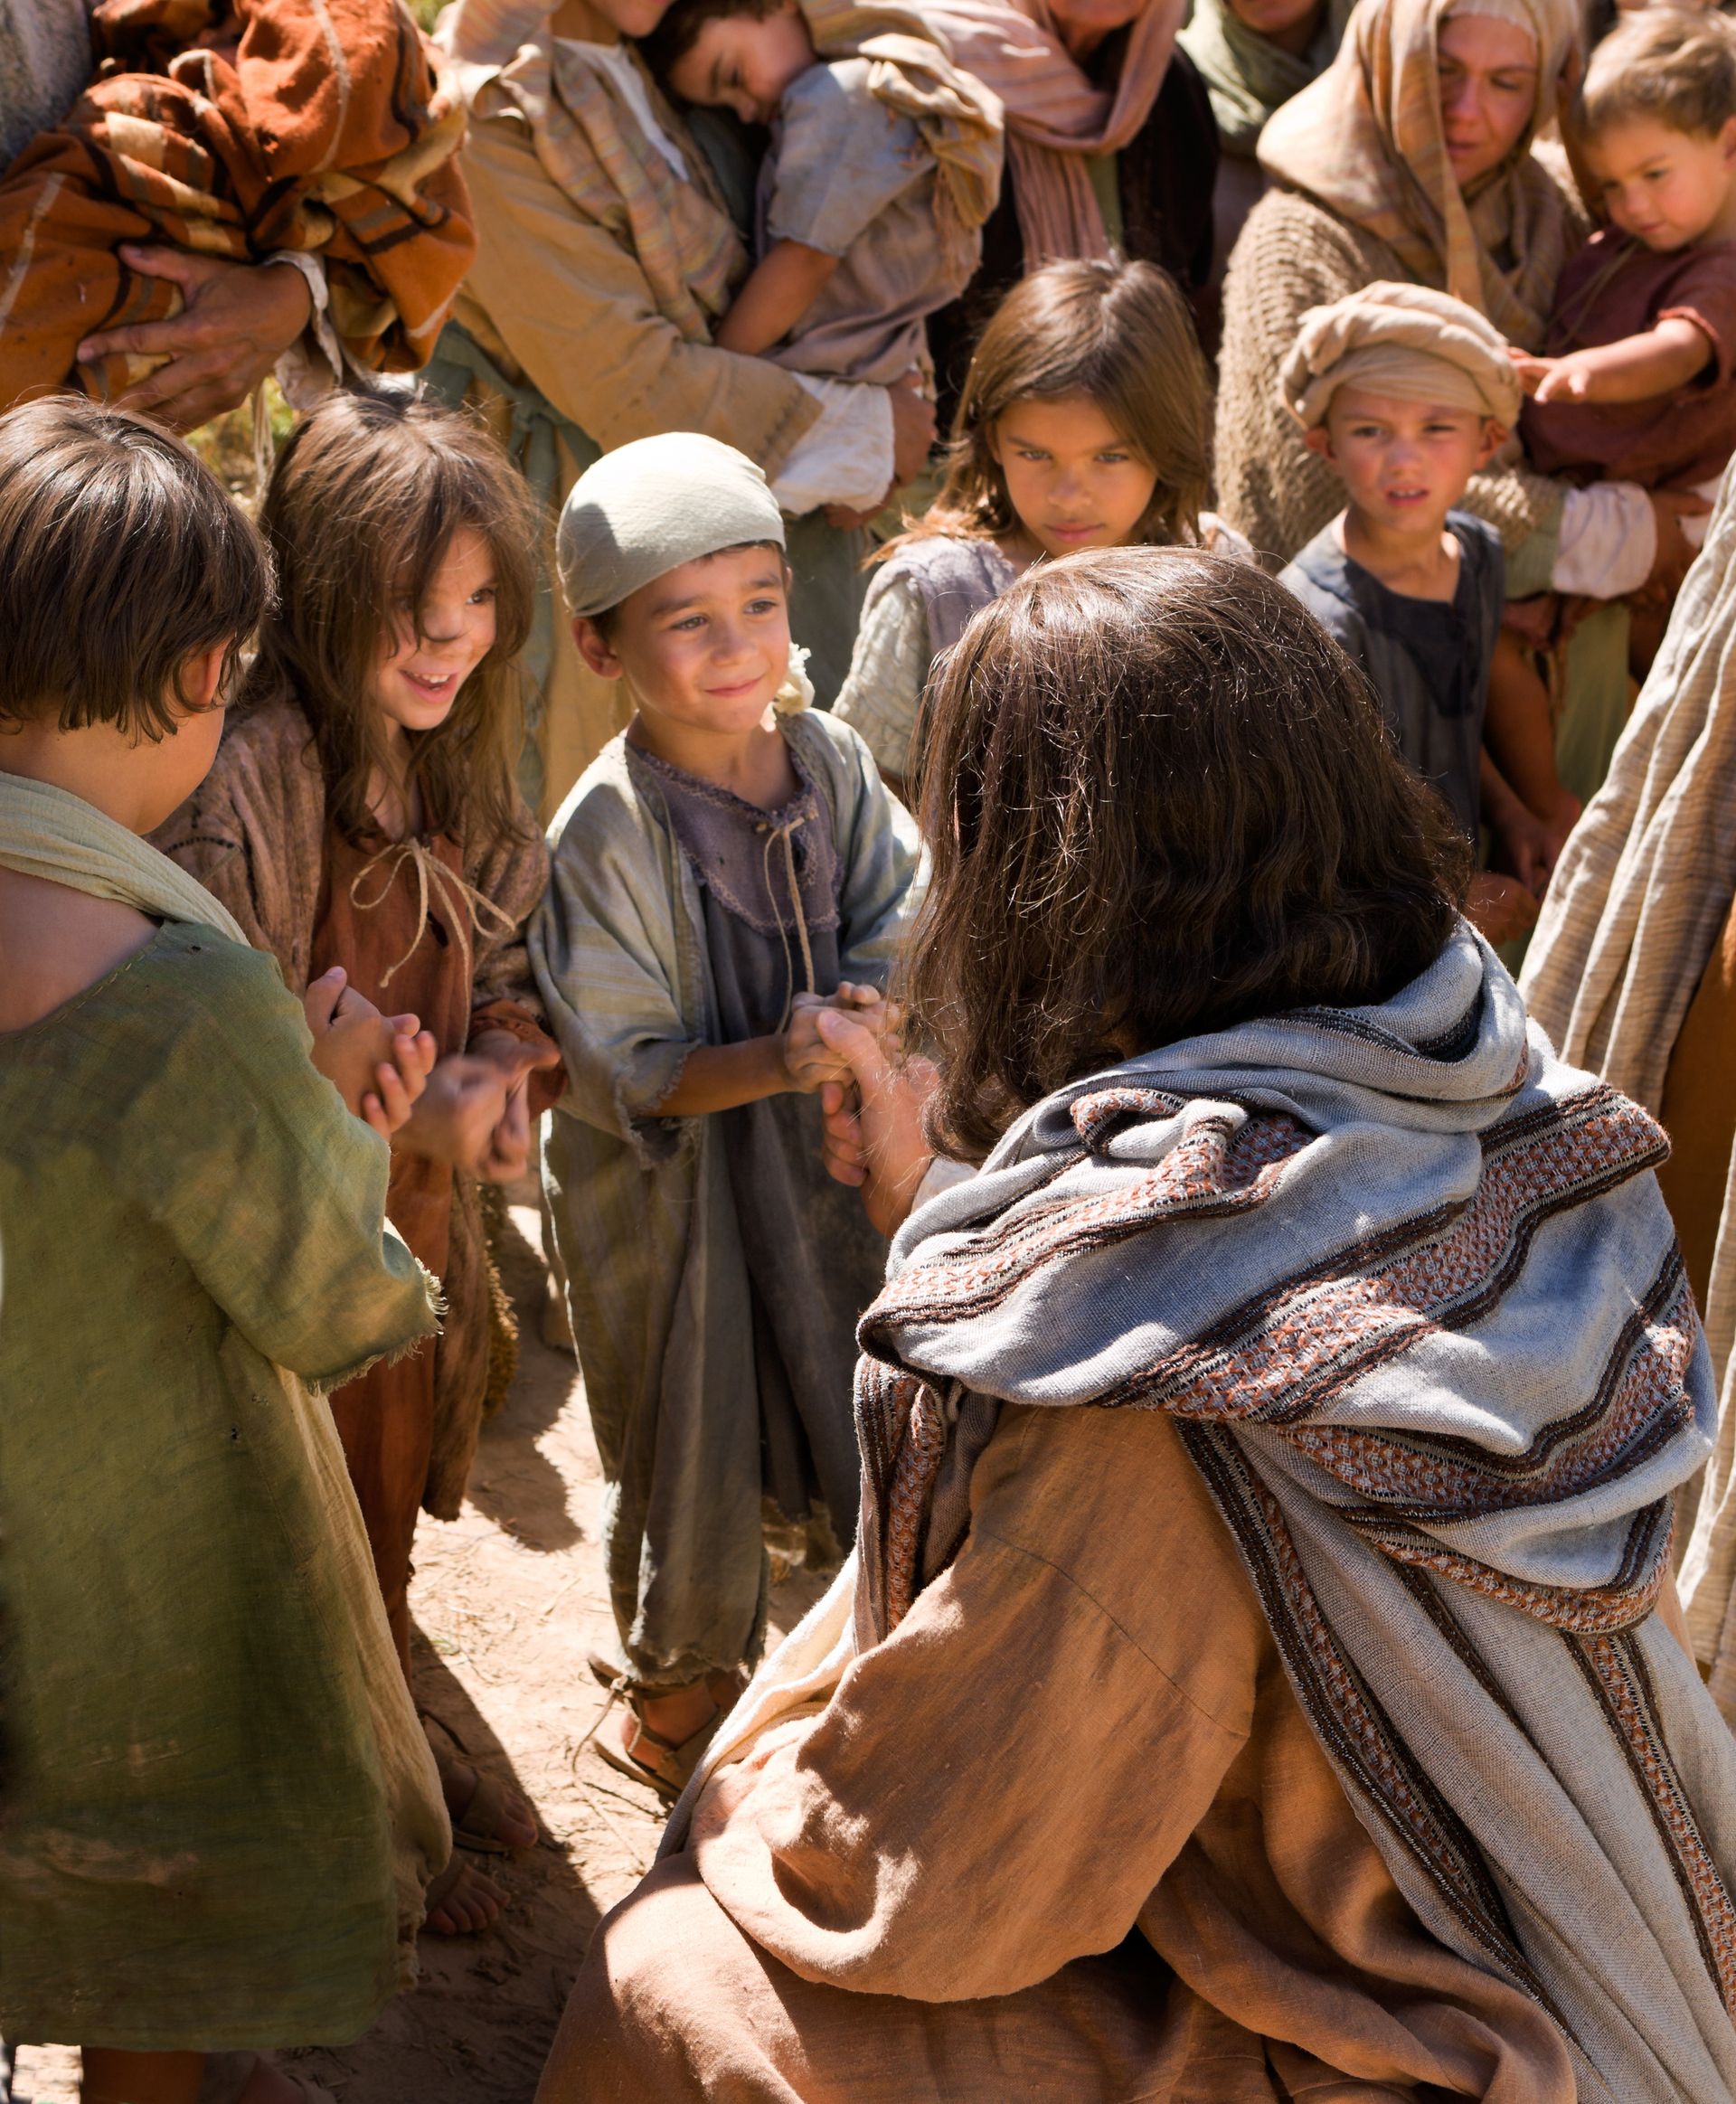 Jesus Christ, surrounded by a group of children, shows them love and compassion.